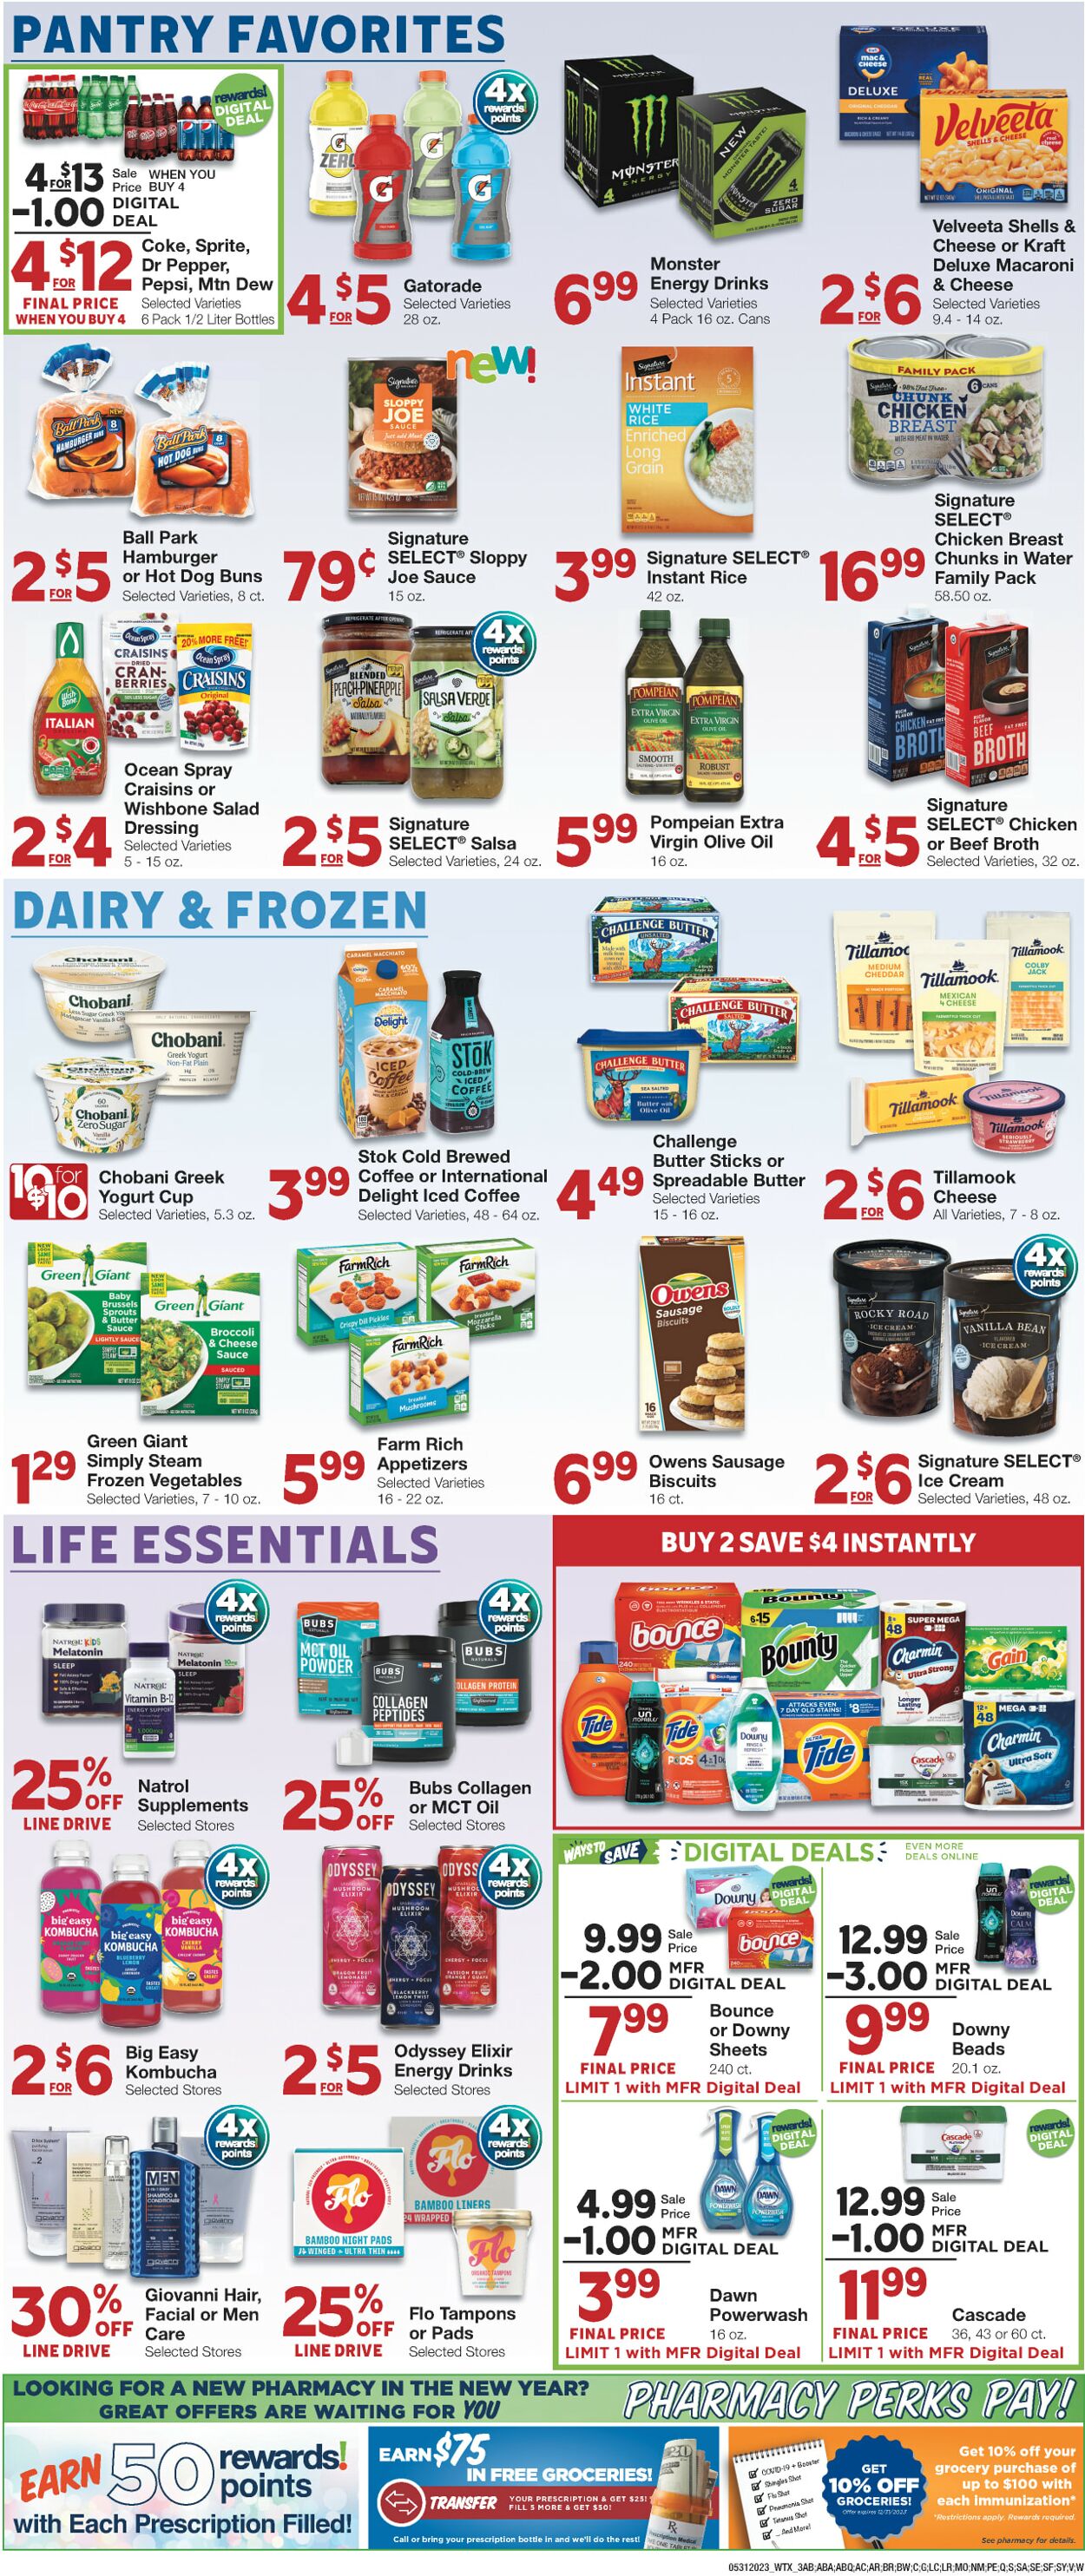 Weekly ad United Supermarkets 05/31/2023 - 06/06/2023